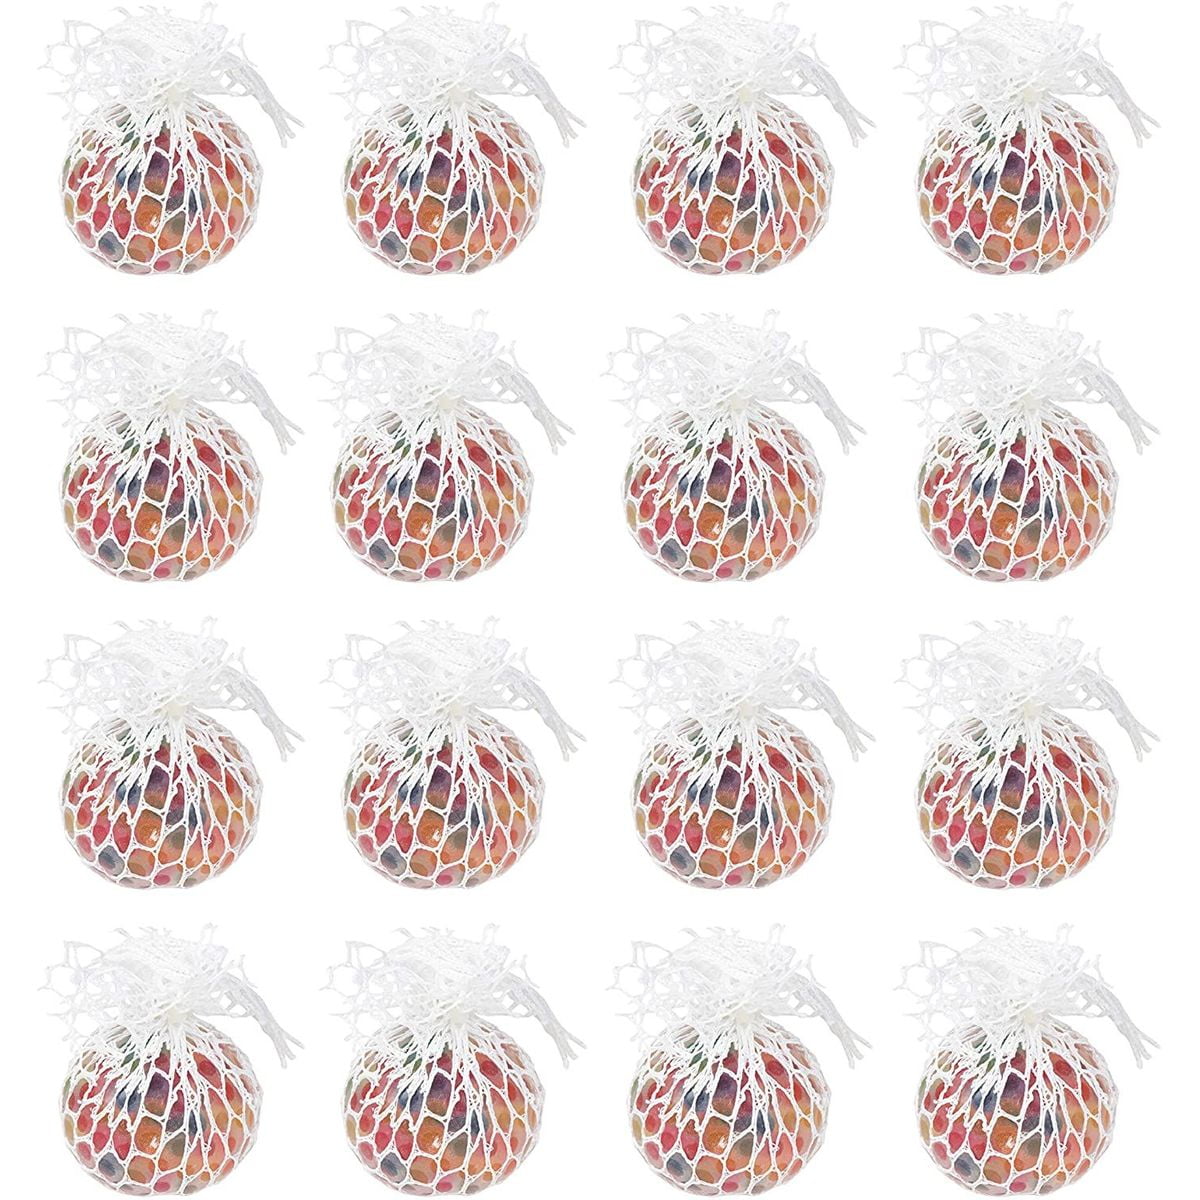 Baby Kids Funny Sensory Ball Rainbow Multicolor Stress Relief Colorful Toy L 